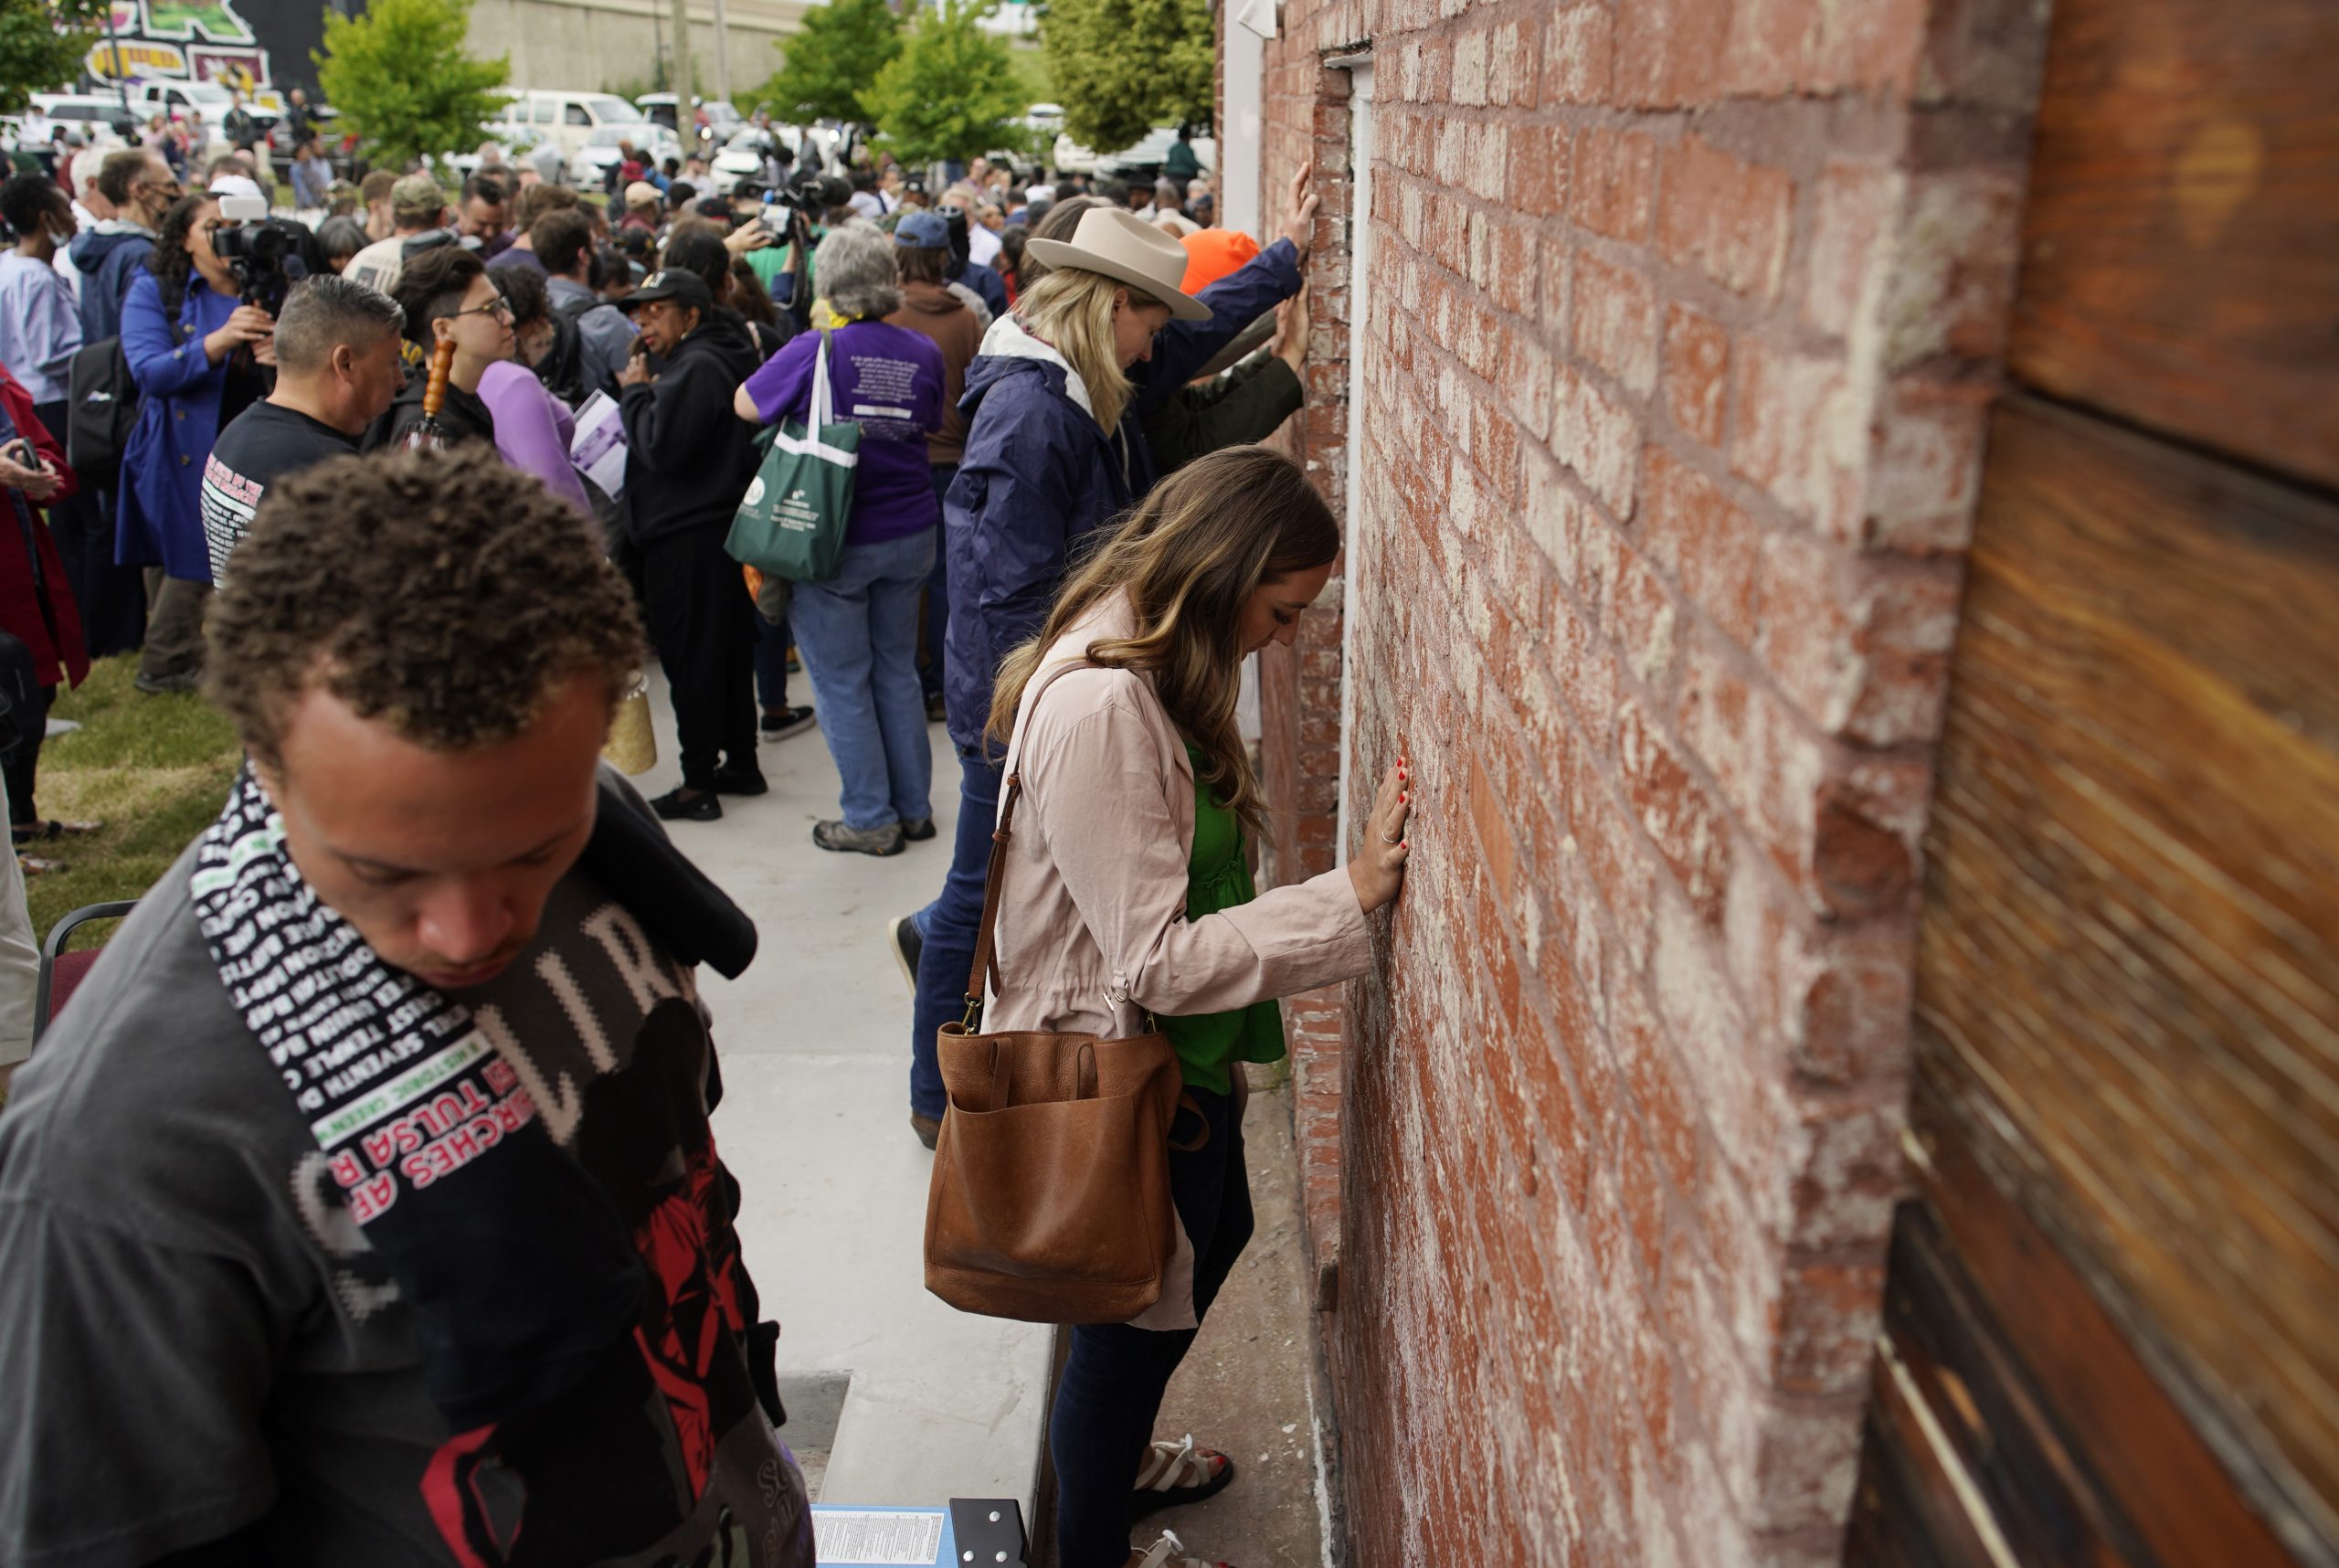 People hold their hands on a prayer wall outside of the historic Vernon African Methodist Episcopal Church in the Greenwood neighborhood during the centennial of the Tulsa Race Massacre, Monday, May 31, 2021, in Tulsa, Okla. The church was largely destroyed when a white mob descended on the prosperous Black neighborhood in 1921, burning, killing, looting and leveling a 35-square-block area. (AP Photo/John Locher)